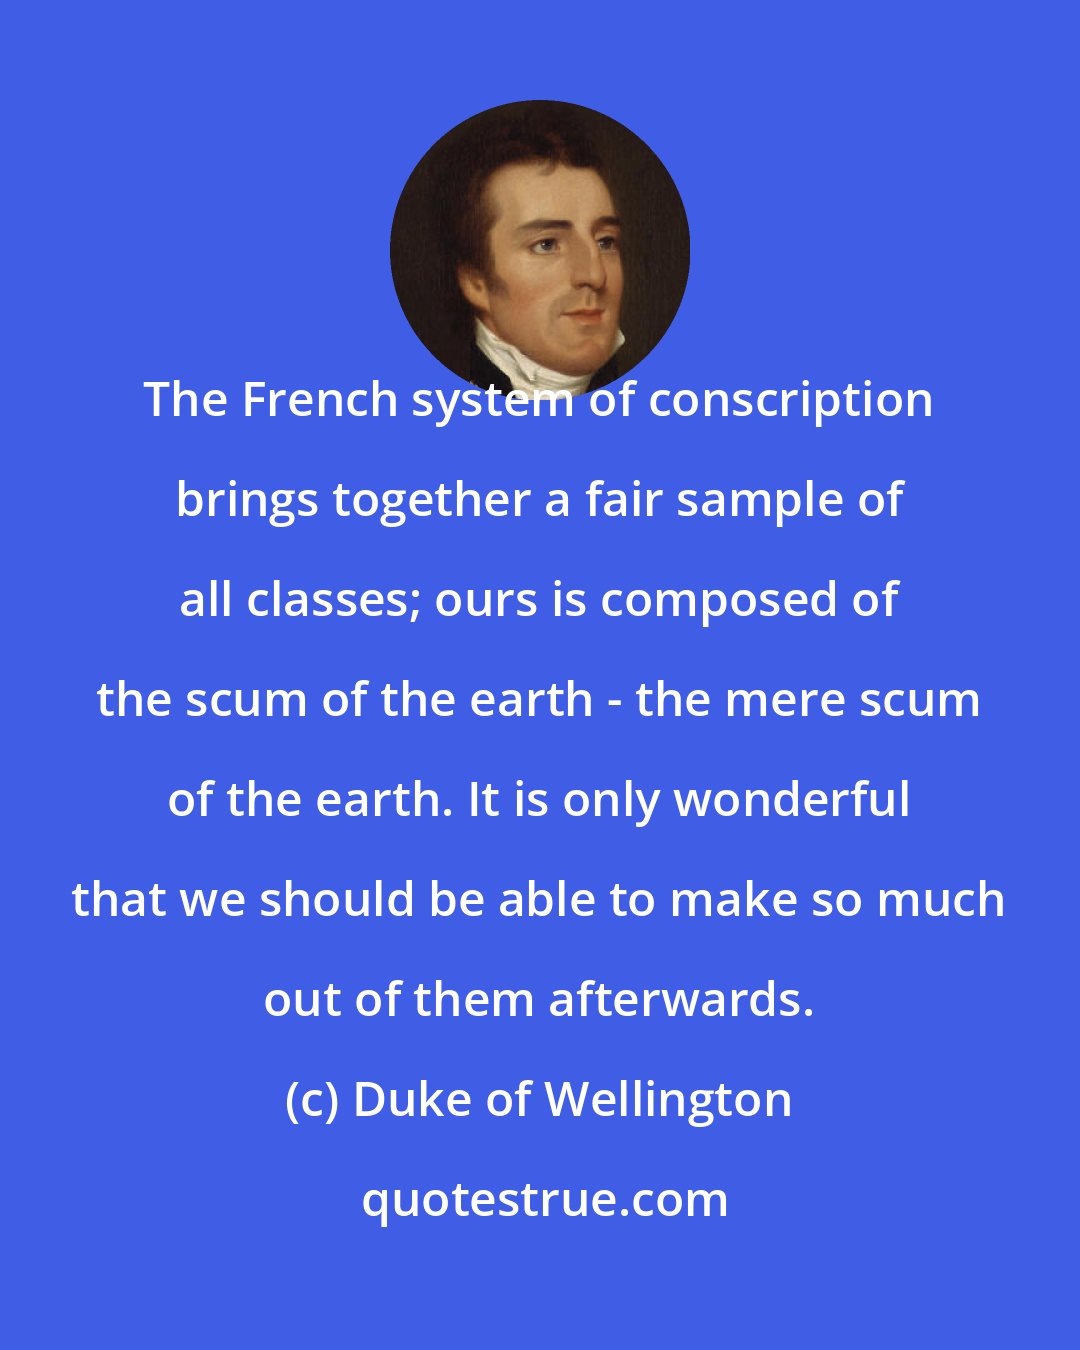 Duke of Wellington: The French system of conscription brings together a fair sample of all classes; ours is composed of the scum of the earth - the mere scum of the earth. It is only wonderful that we should be able to make so much out of them afterwards.